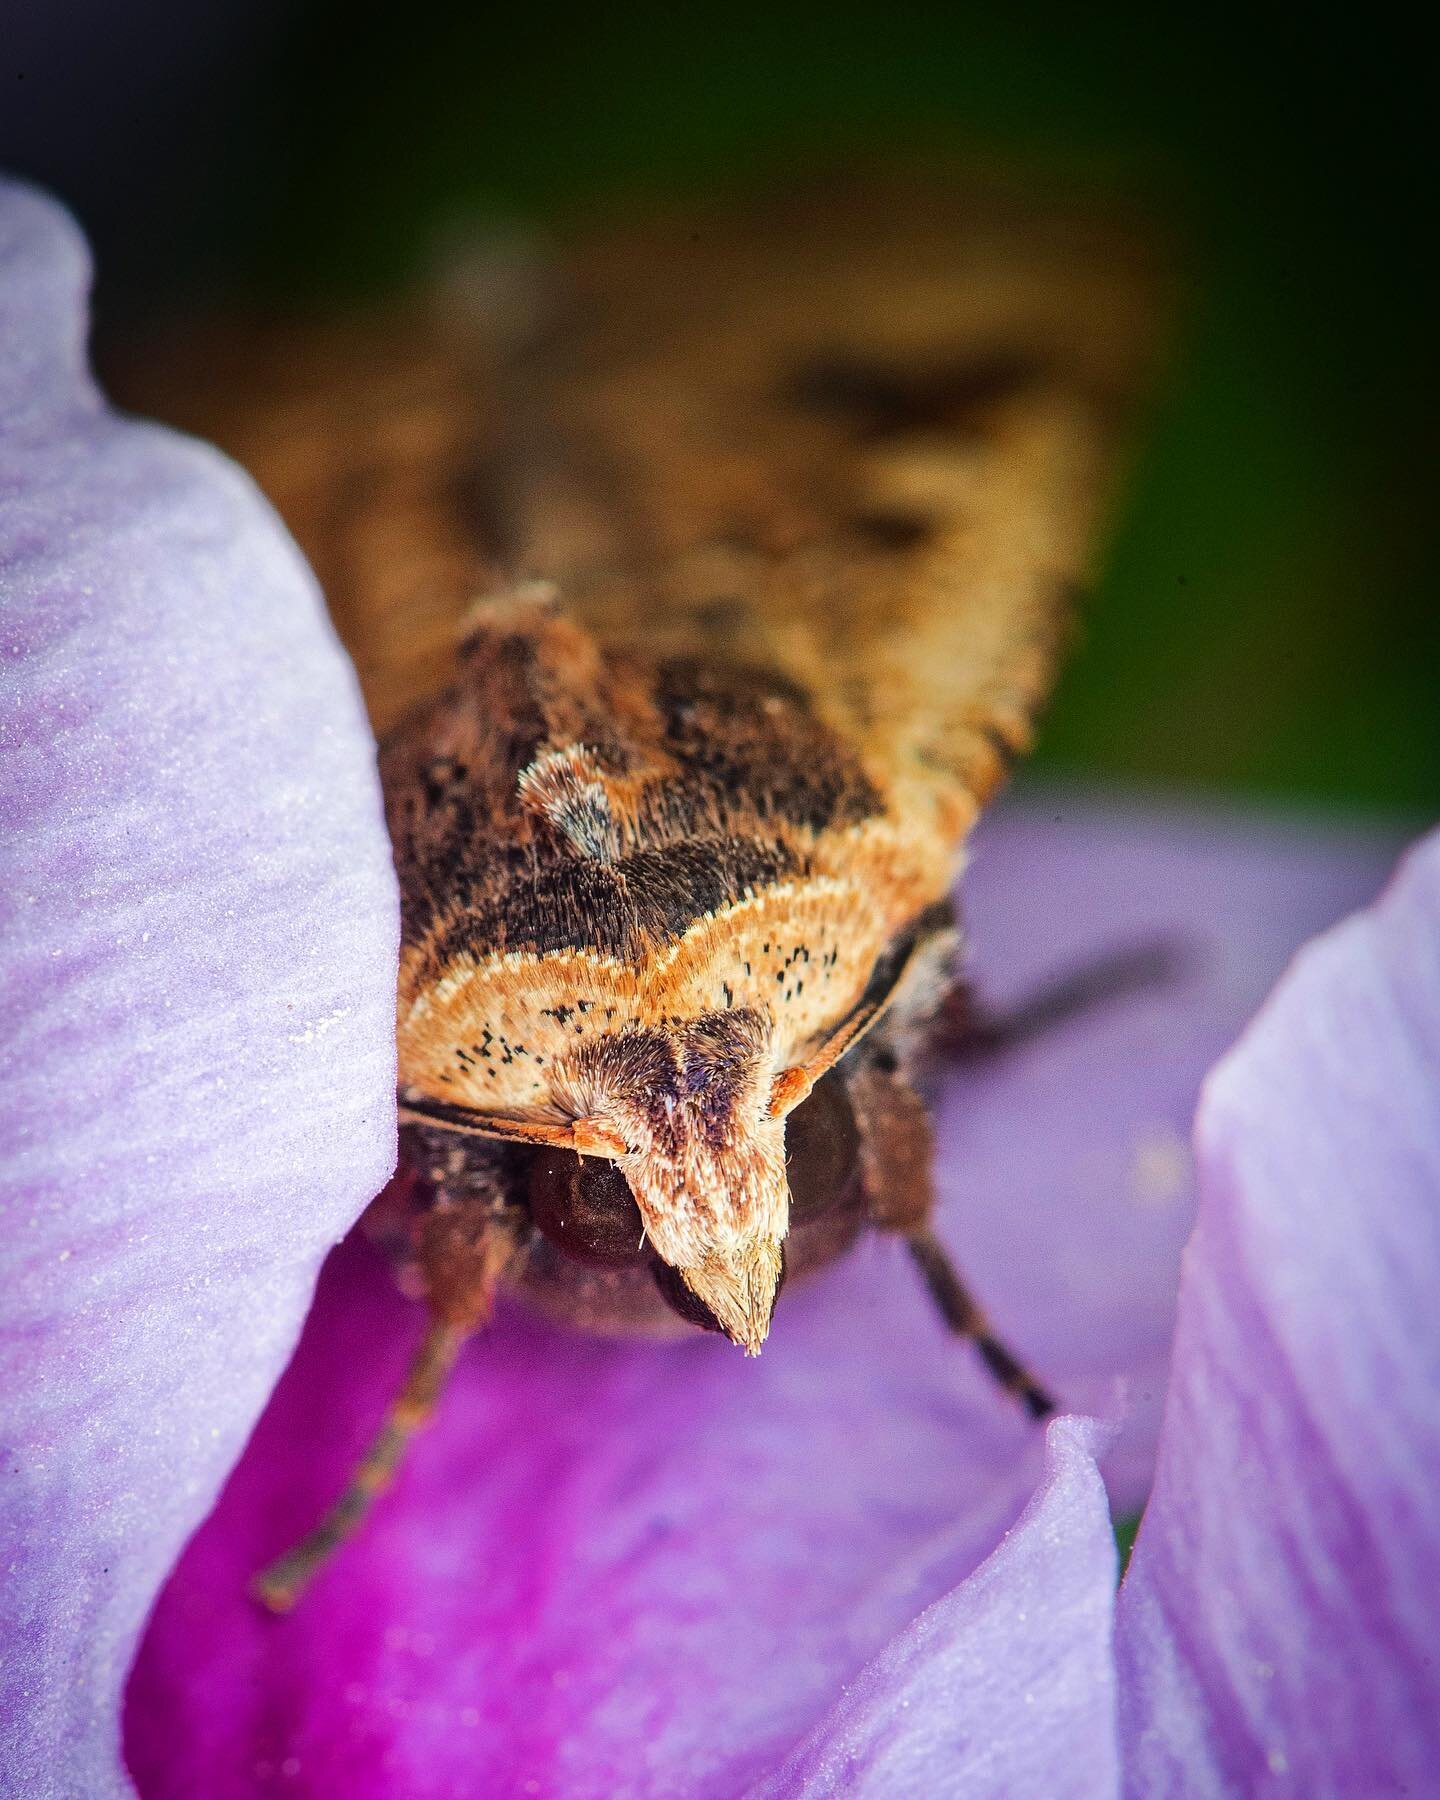 A copper underwing moth resting in a clematis in my backyard. 
.
.
.
#macrophotography #moth #macroclique #natureupclose #naturesbeauty #wildlifeplanet #wildlifeconservation #wildlifefeature #lookcloser #kings_macro #insectworld #naturalworld #microp